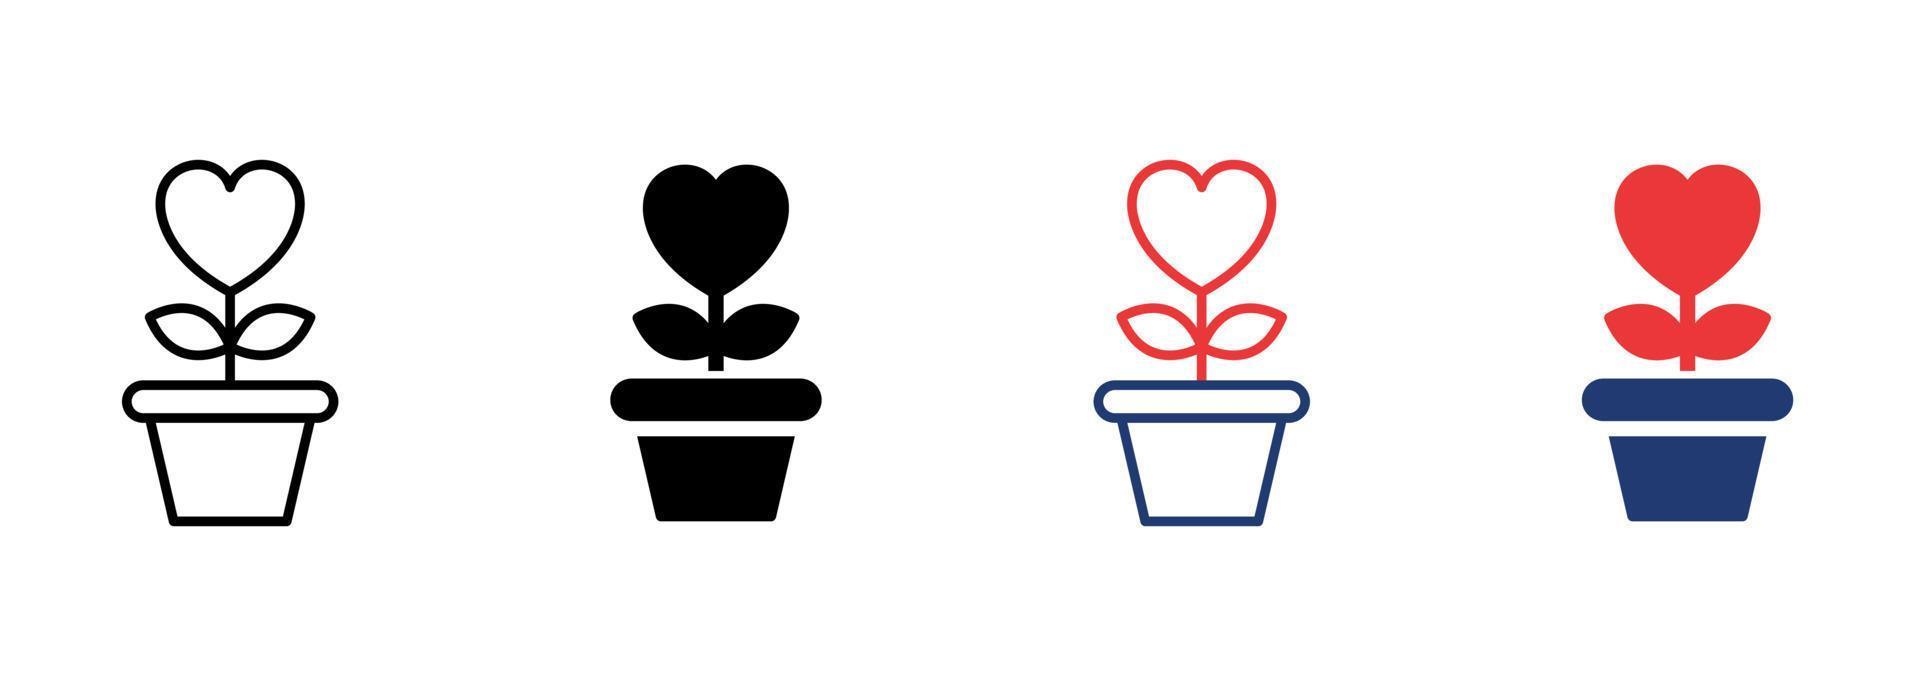 Heart Shape Flower in Pot with Leaf Icon. Charity, Love and Romance Symbol Pictogram. Bloom Plant Grow in Flowerpot Icon. Editable Stroke. Isolated Vector Illustration.